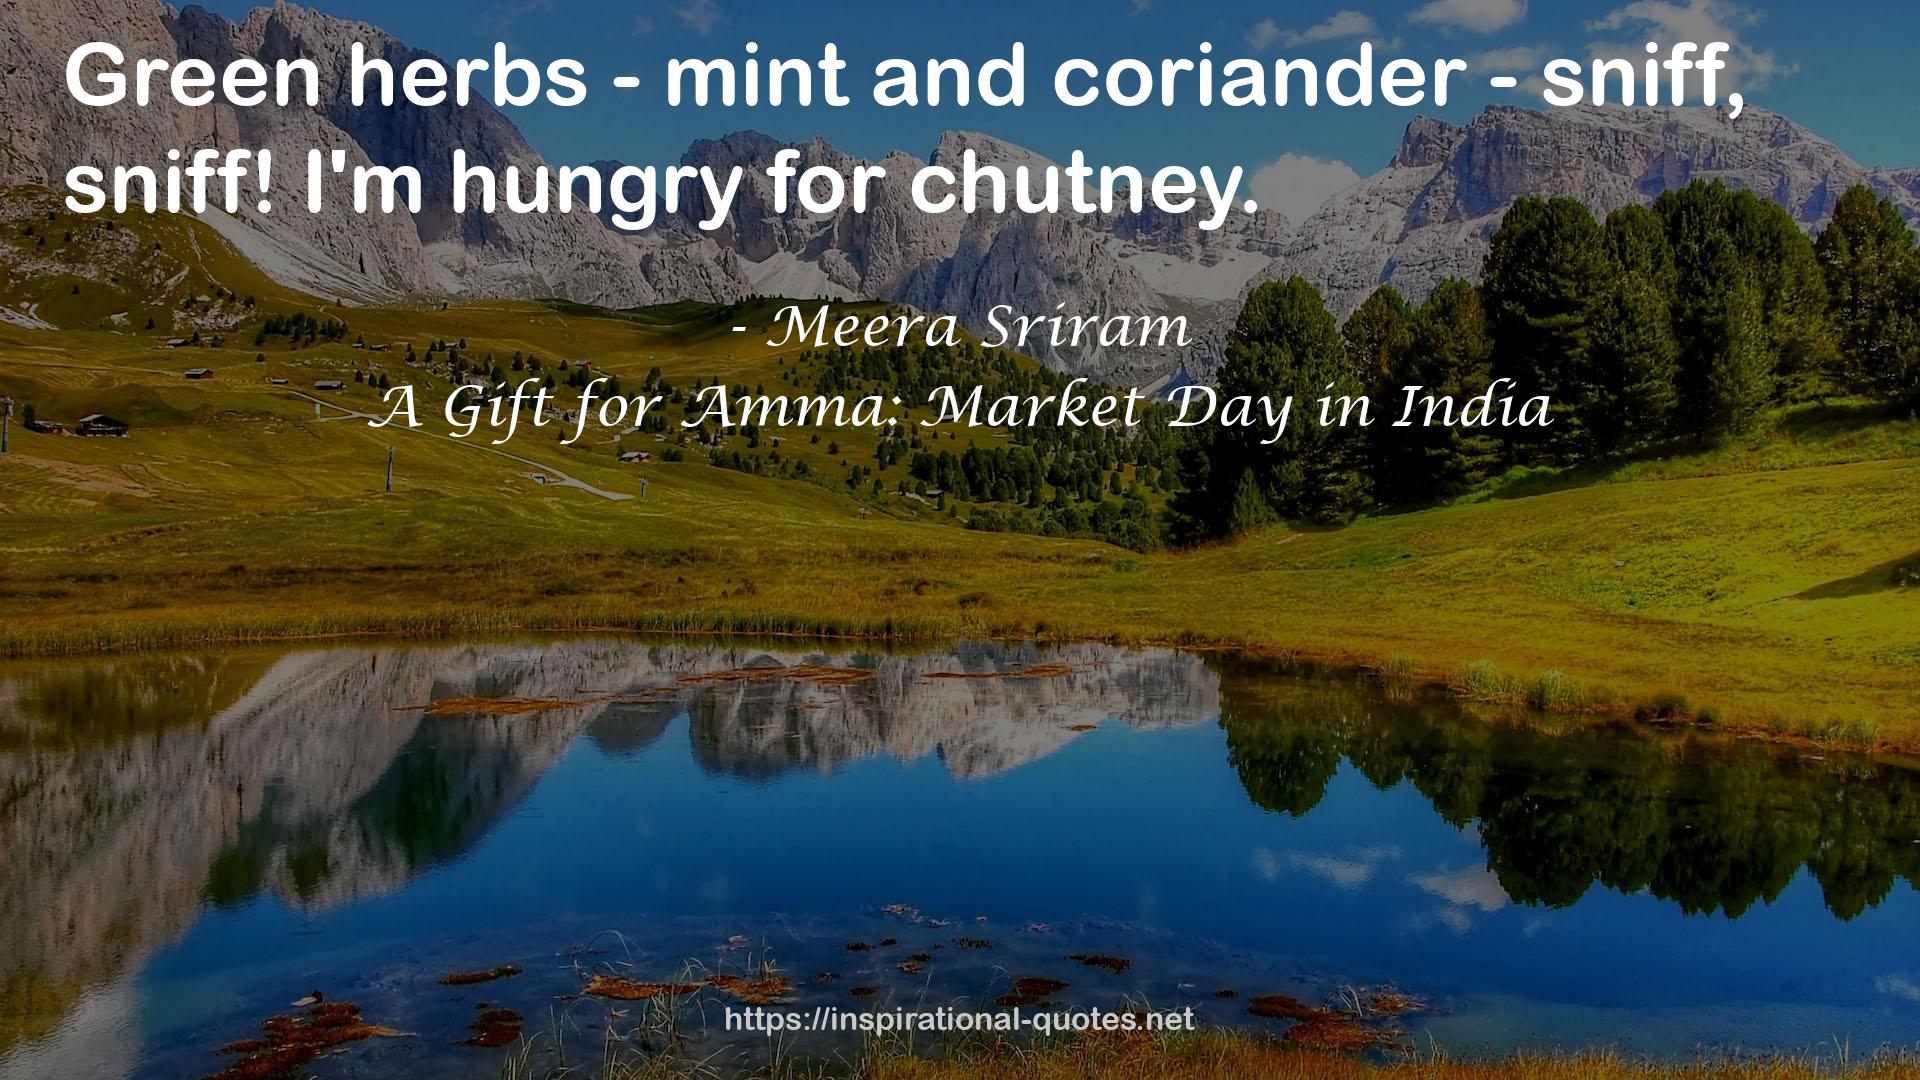 A Gift for Amma: Market Day in India QUOTES